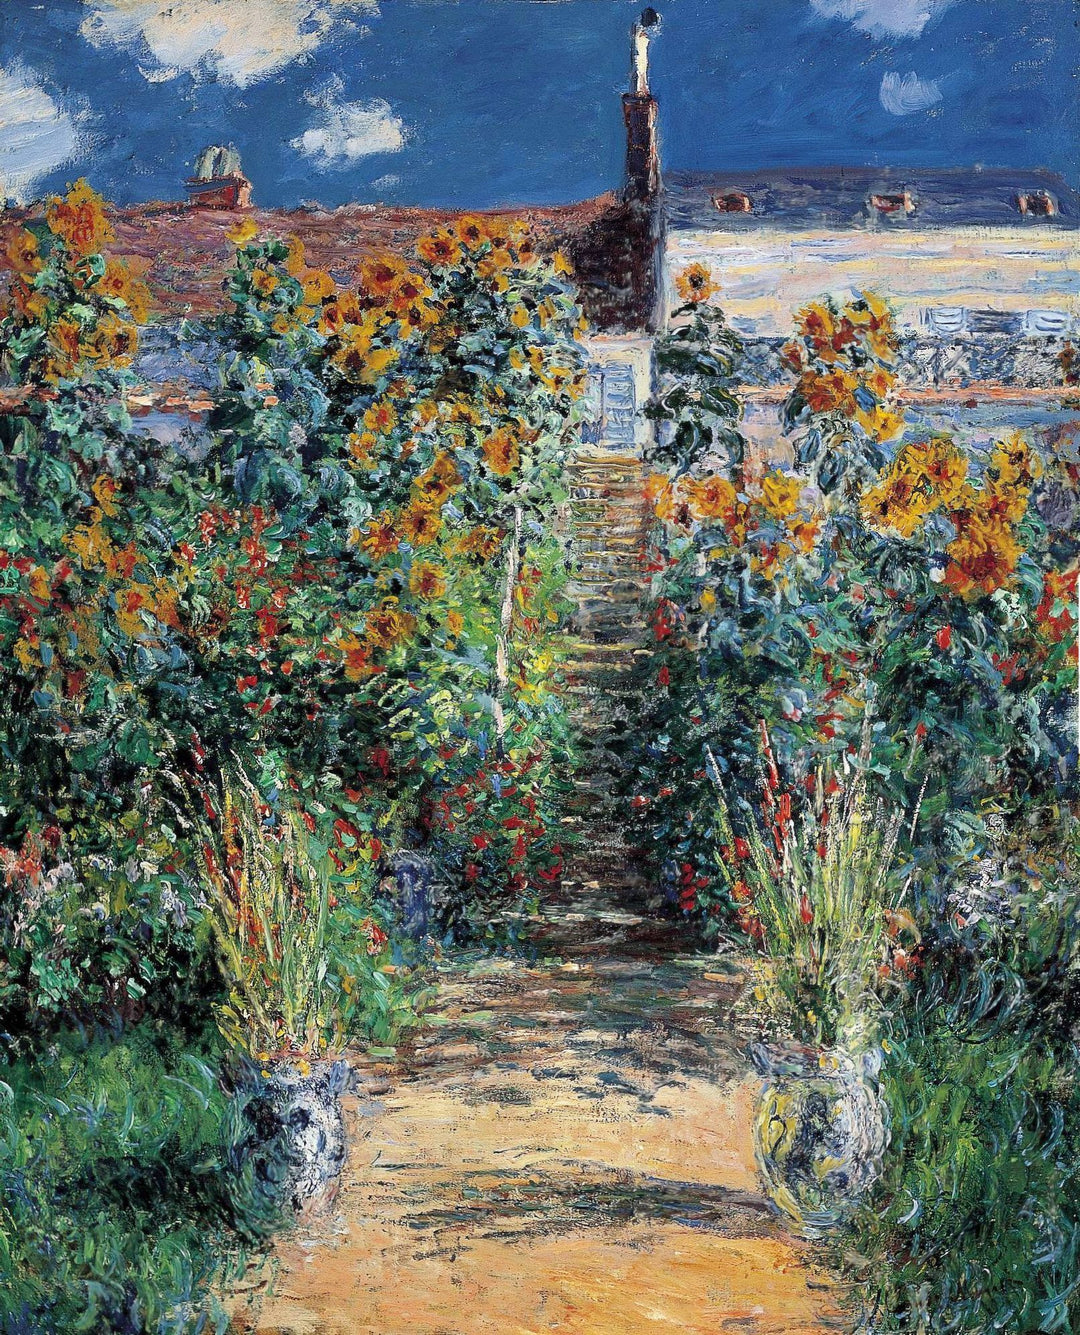 The Garden at Vetheuil 1881 by Claude Monet, Monet Reproduction for Sale Blue Surf Art 